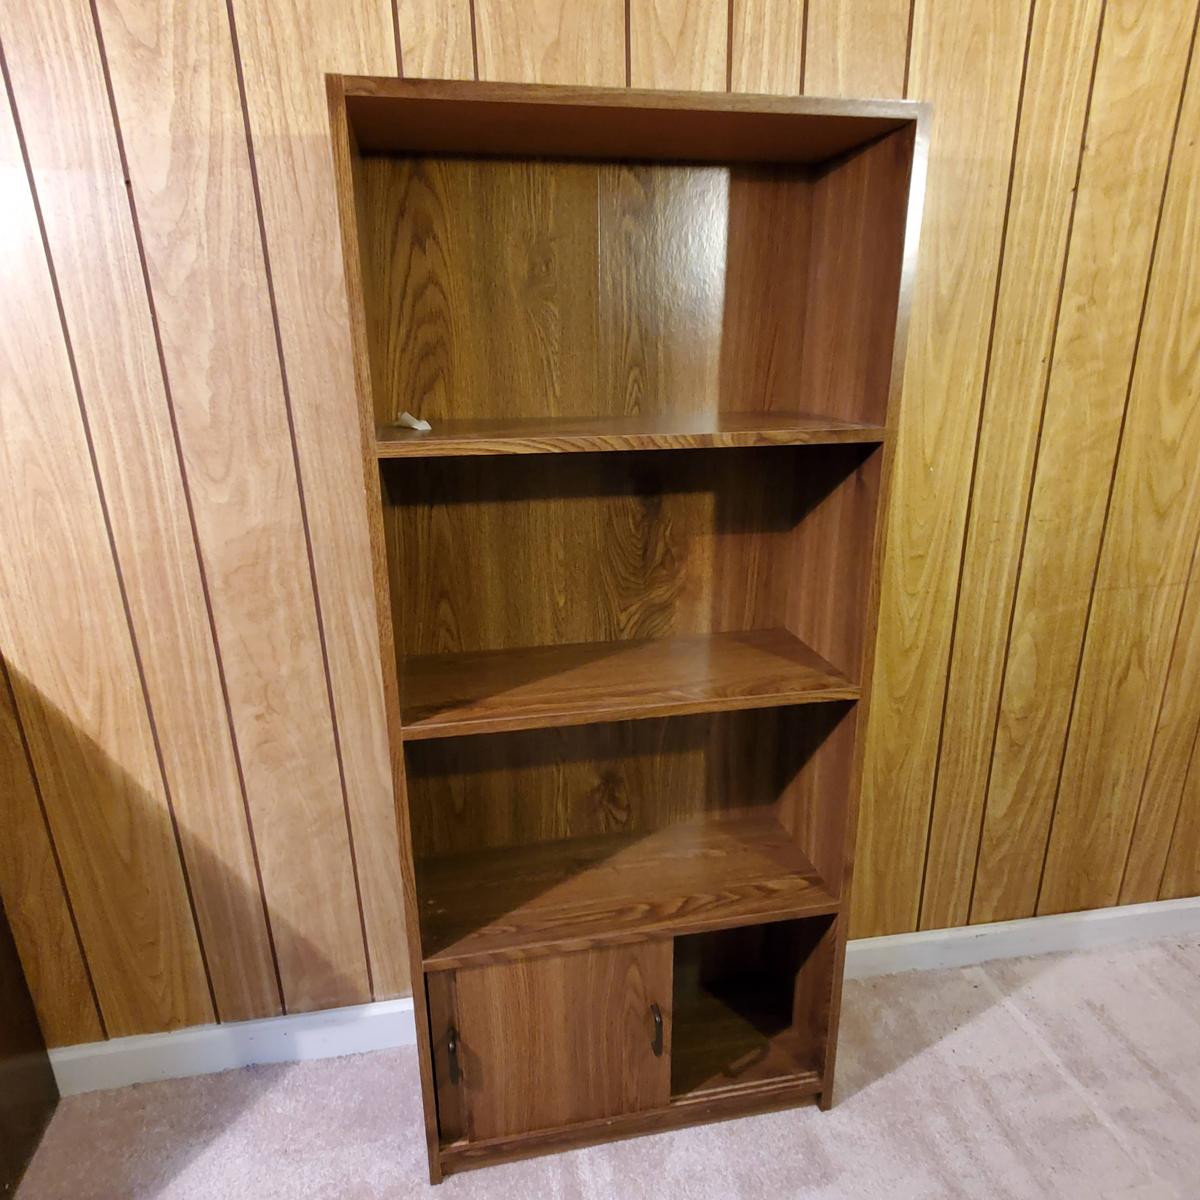 Brown Bookcase with 3 Shelves and a Cubby with Sliding Doors